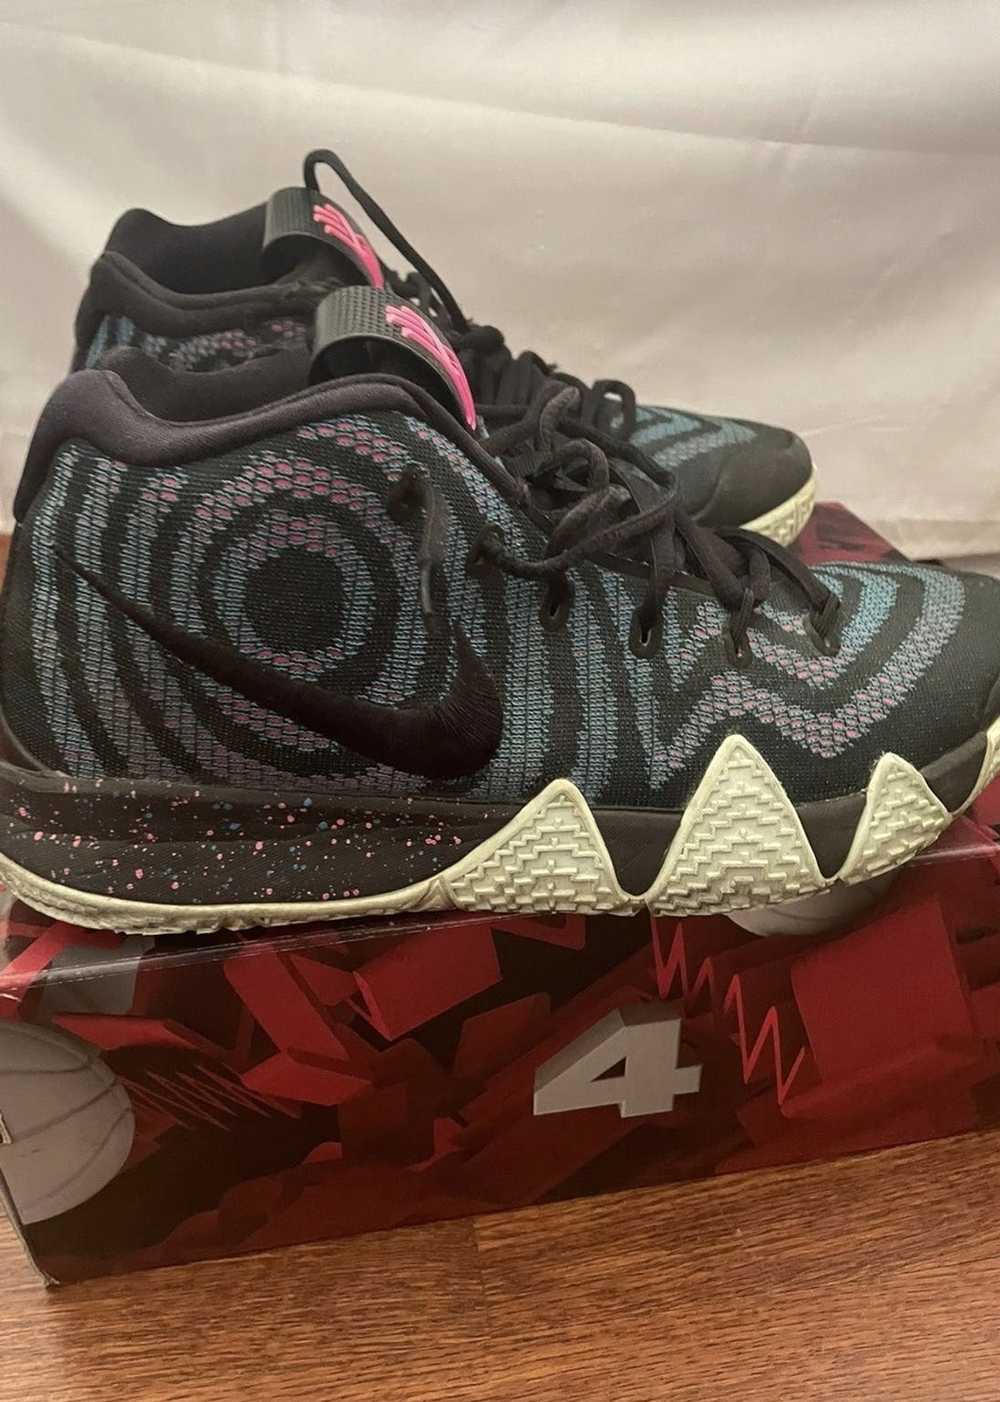 Nike Kyrie 4s 80s decade pack - image 1